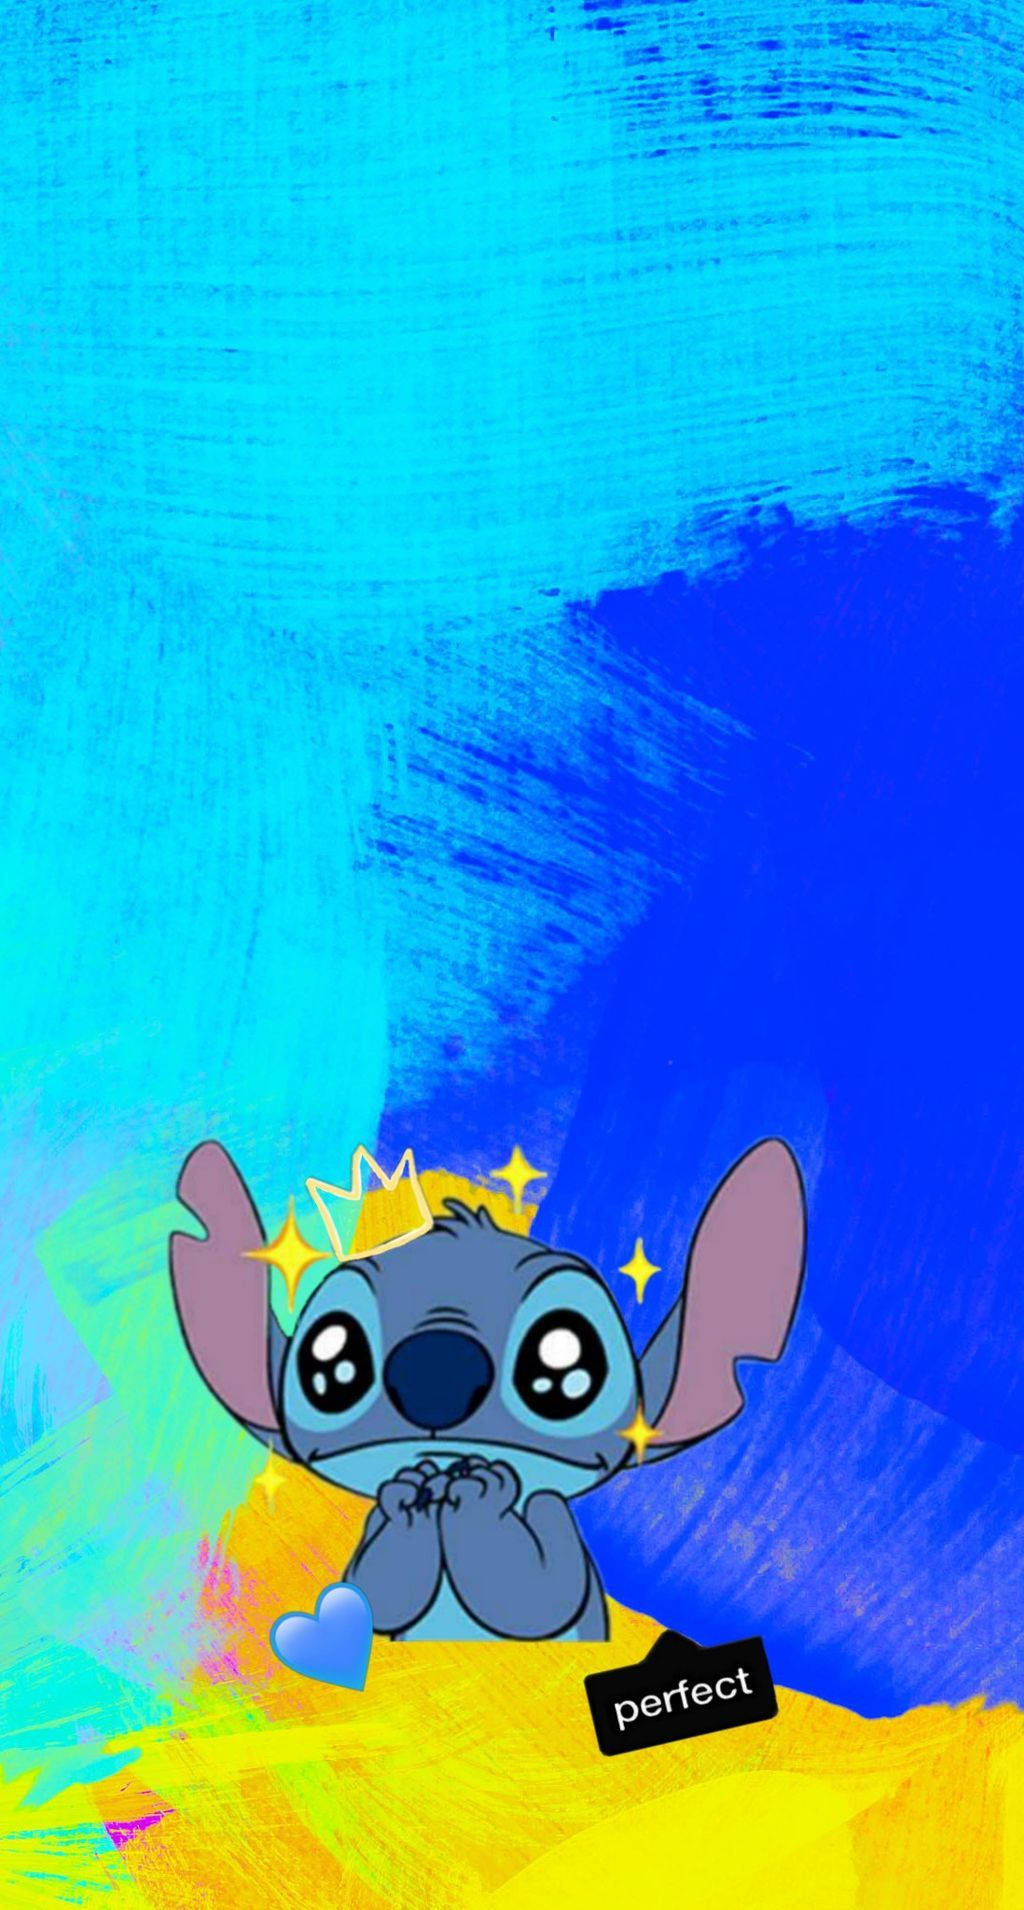 Cute Aesthetic Stitch Looking Adorable Wallpaper